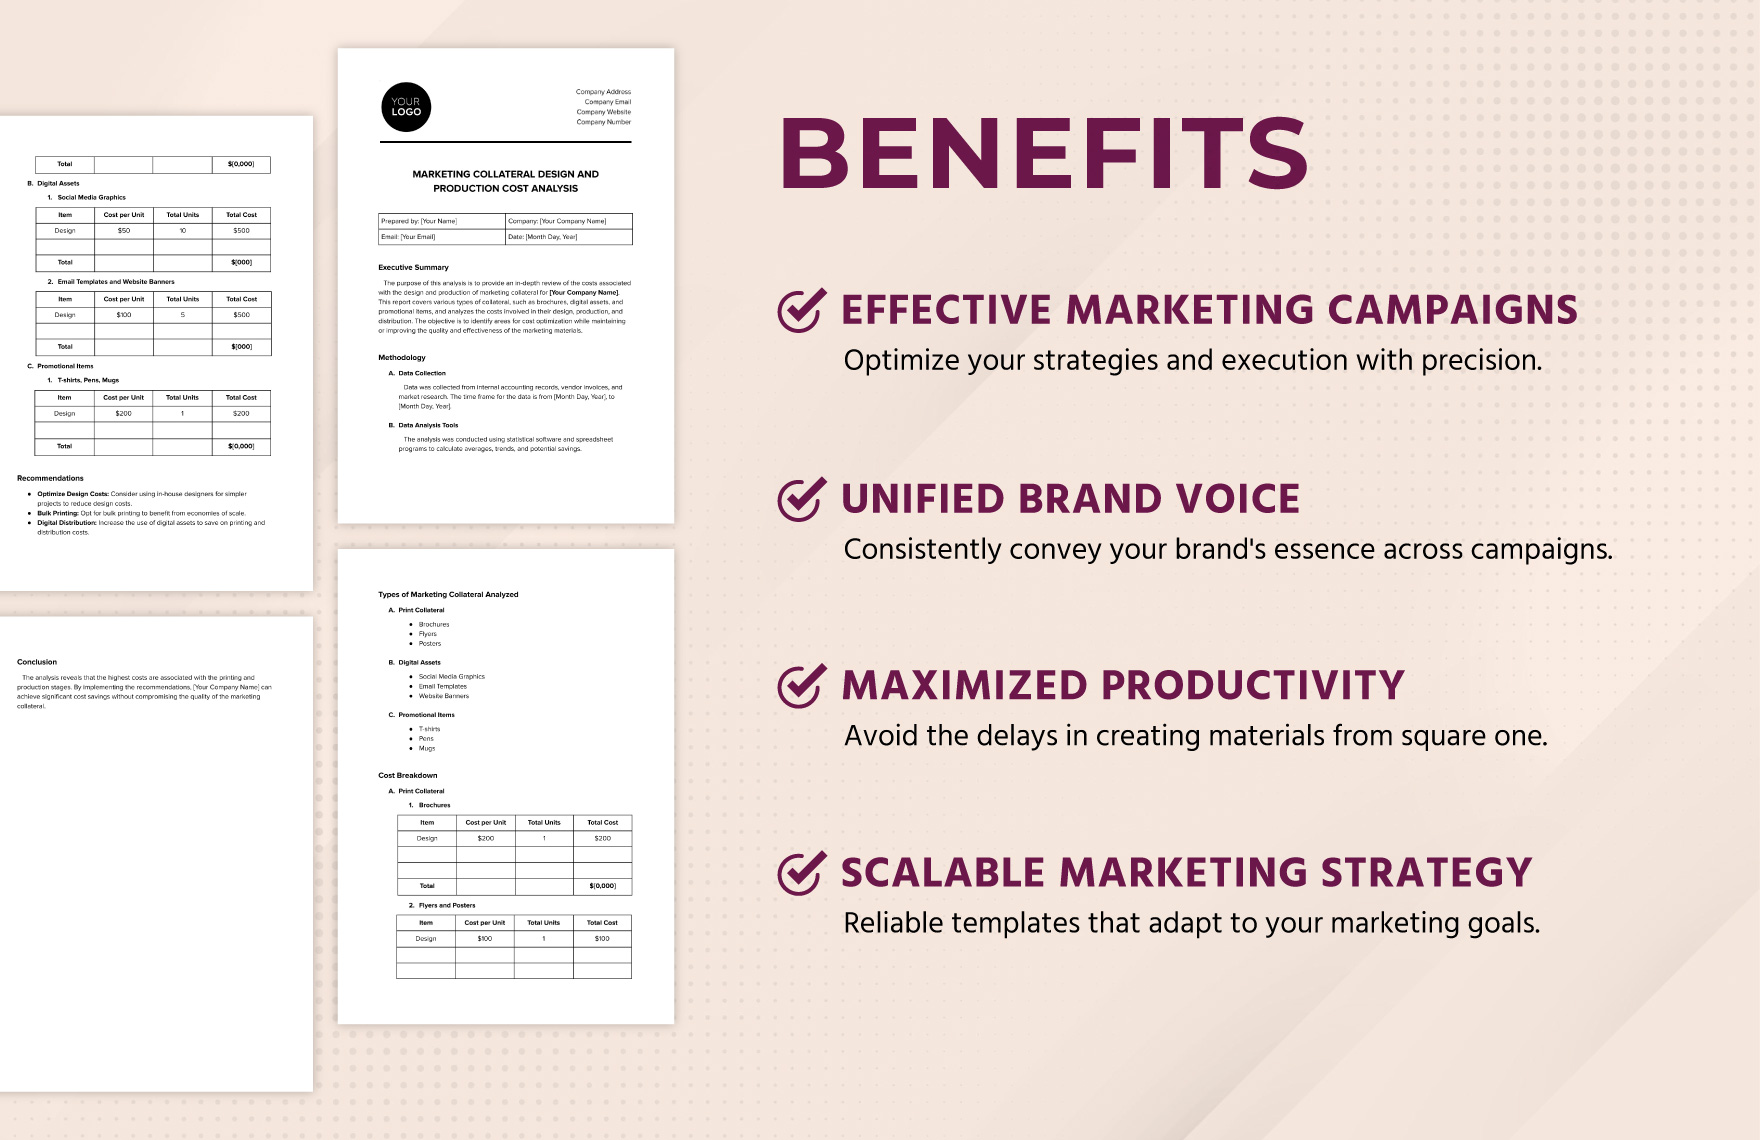 Marketing Collateral Design and Production Cost Analysis Template